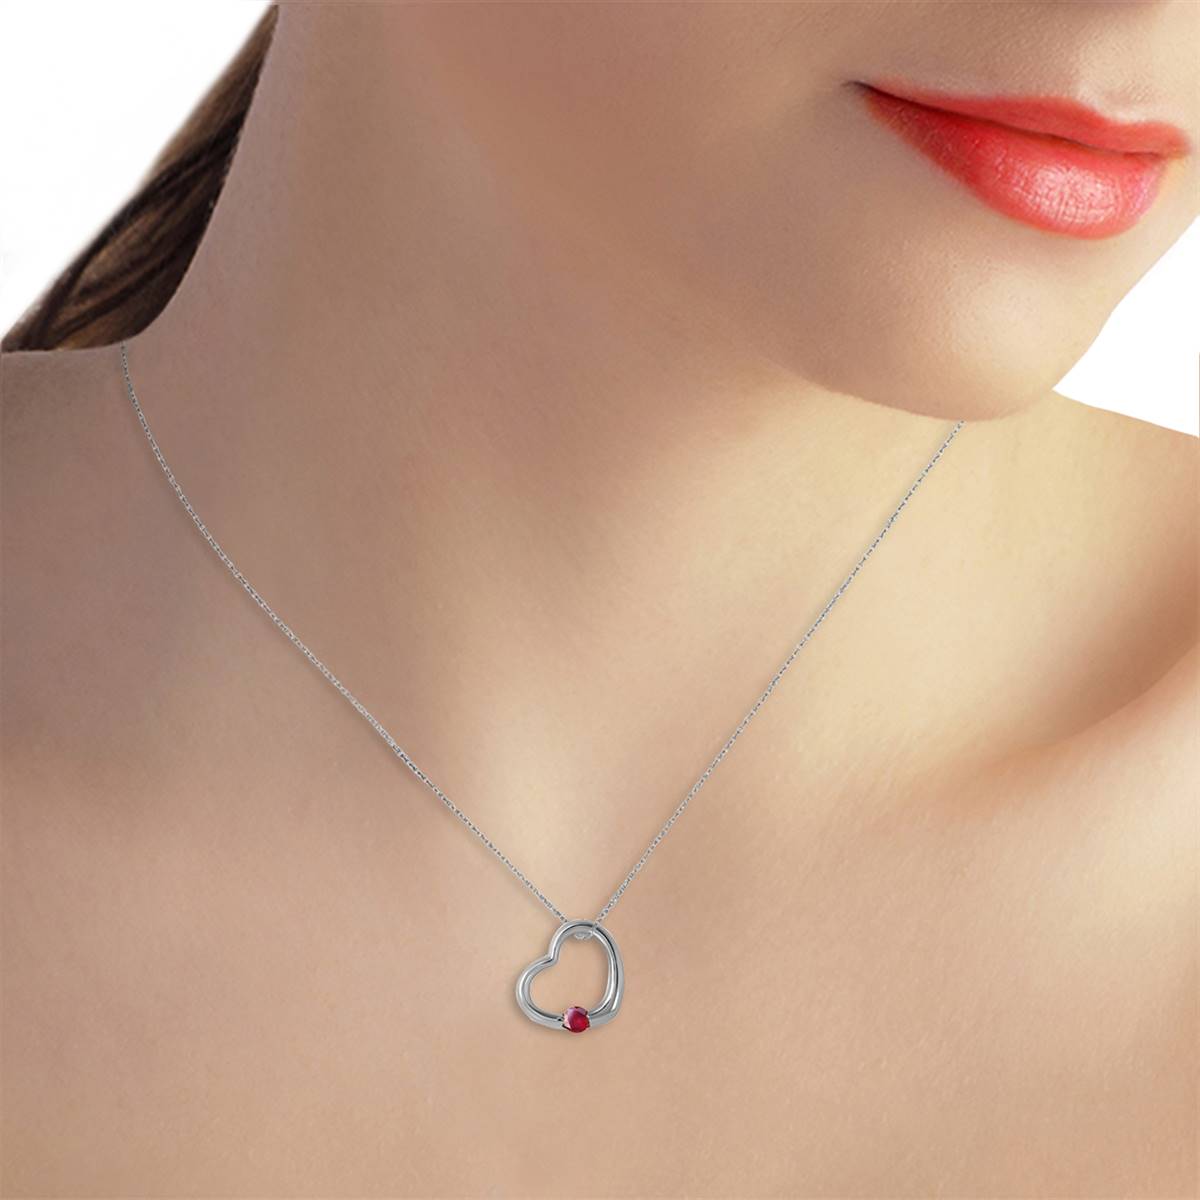 14K Solid White Gold Heart Necklace w/ Natural Ruby